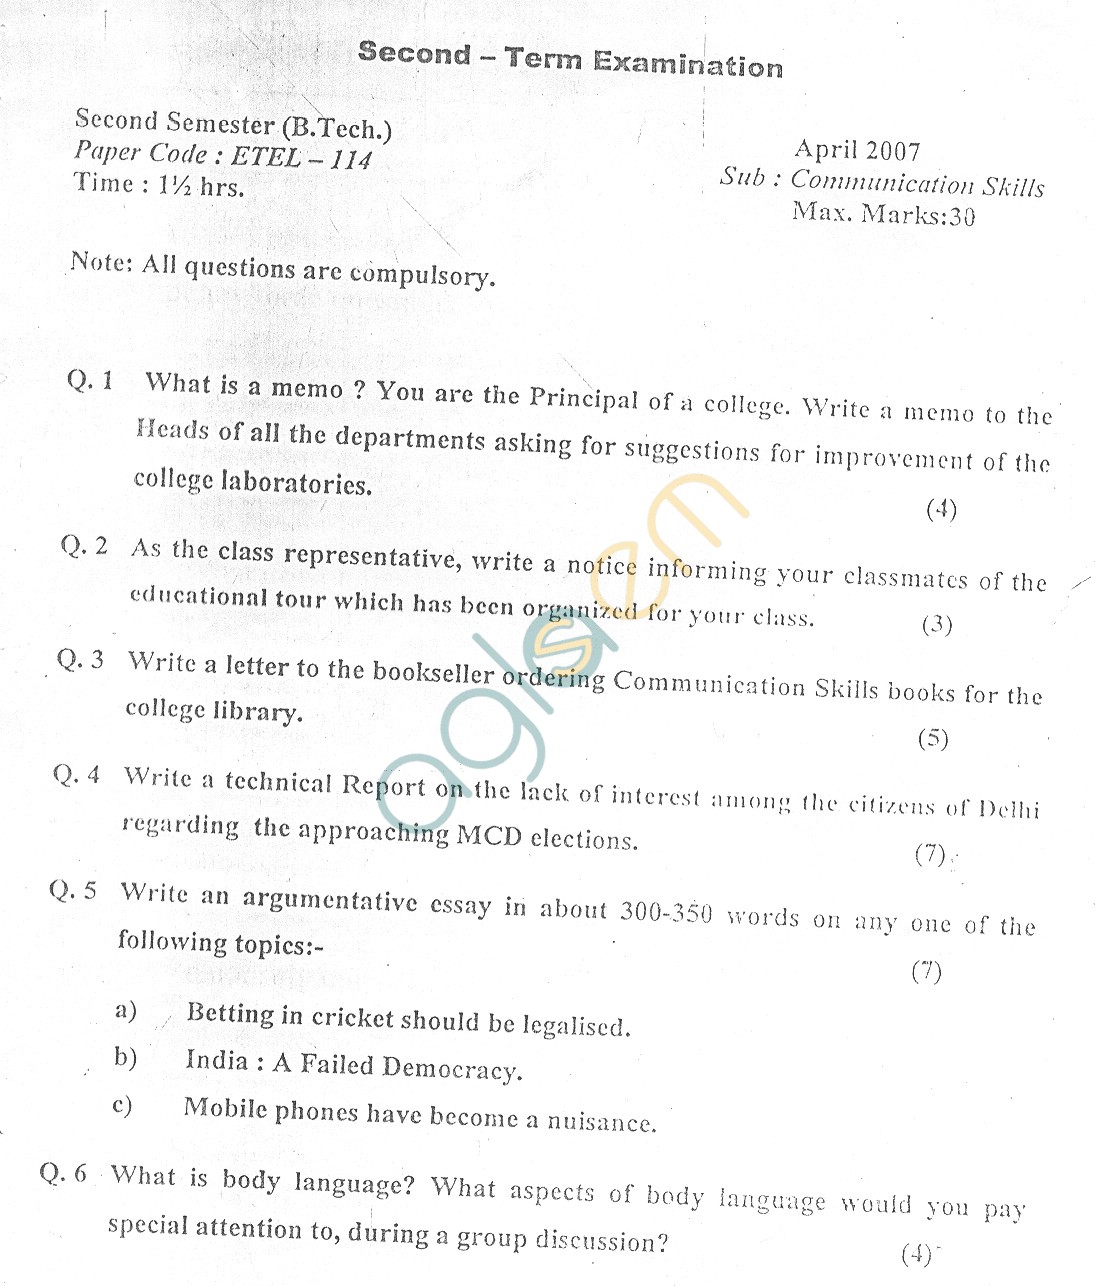 GGSIPU Question Papers Second Semester – Second Term 2007 – ETEL-114